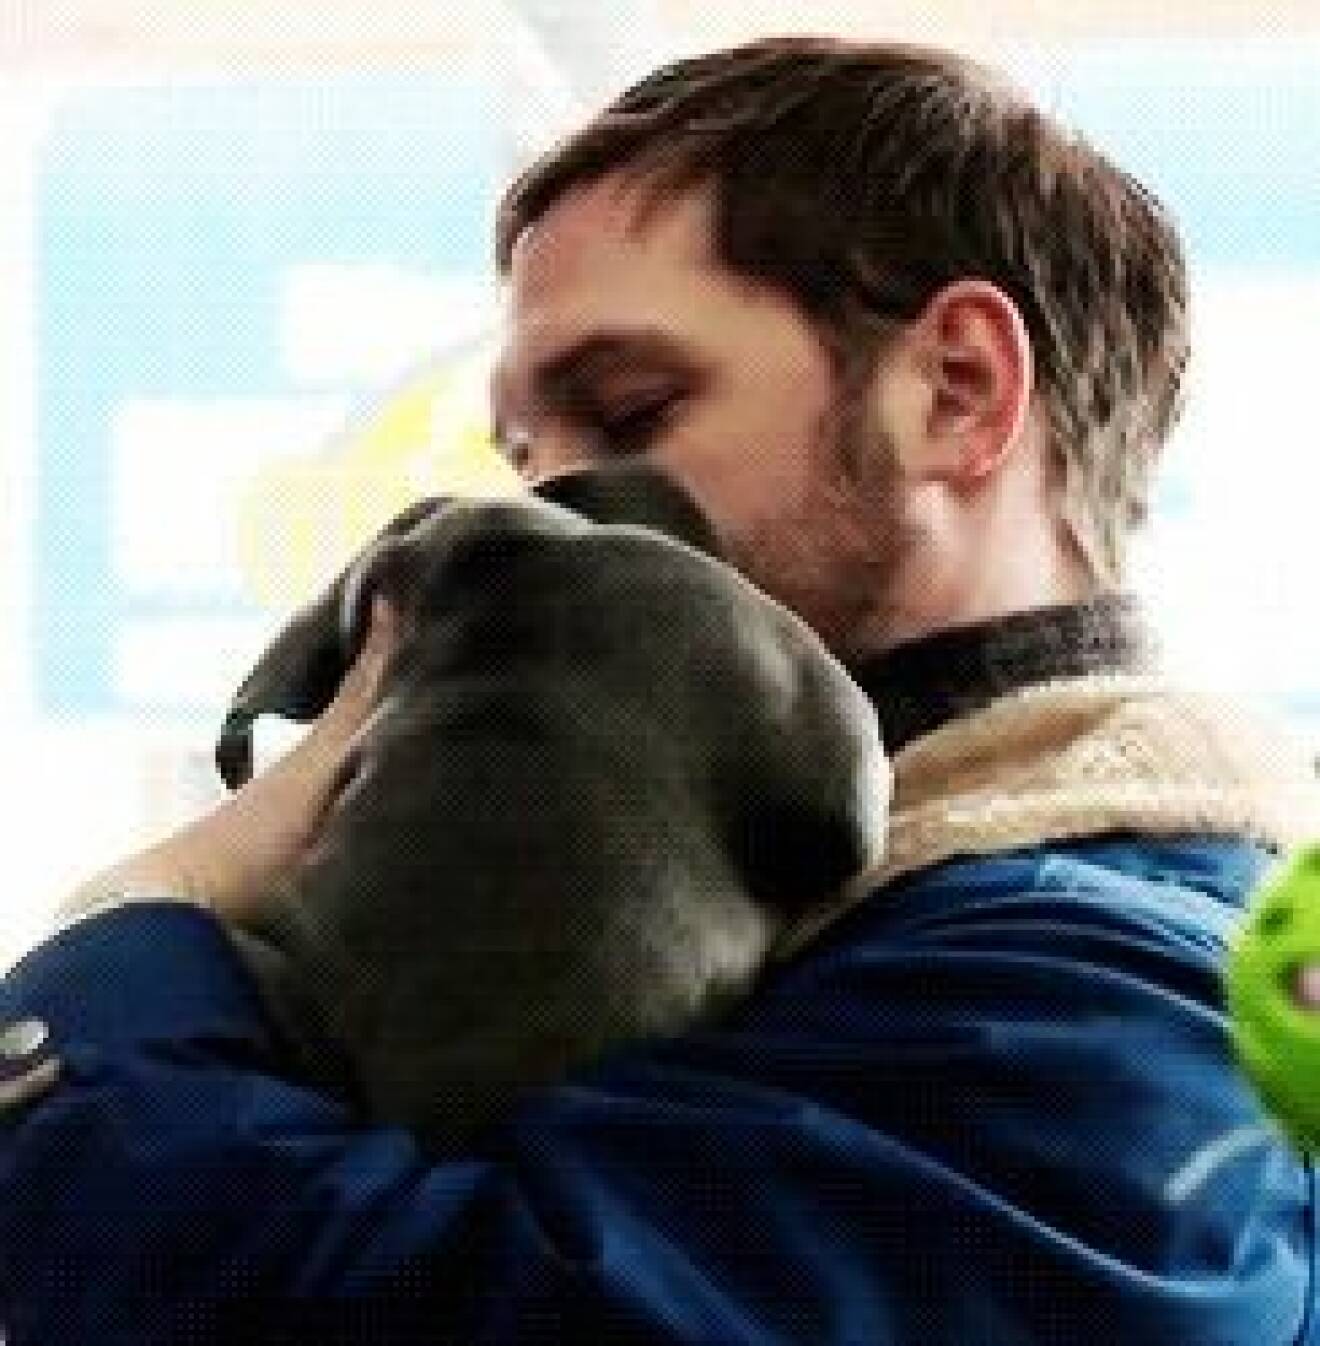 http://giphy.com/search/tom-hardy